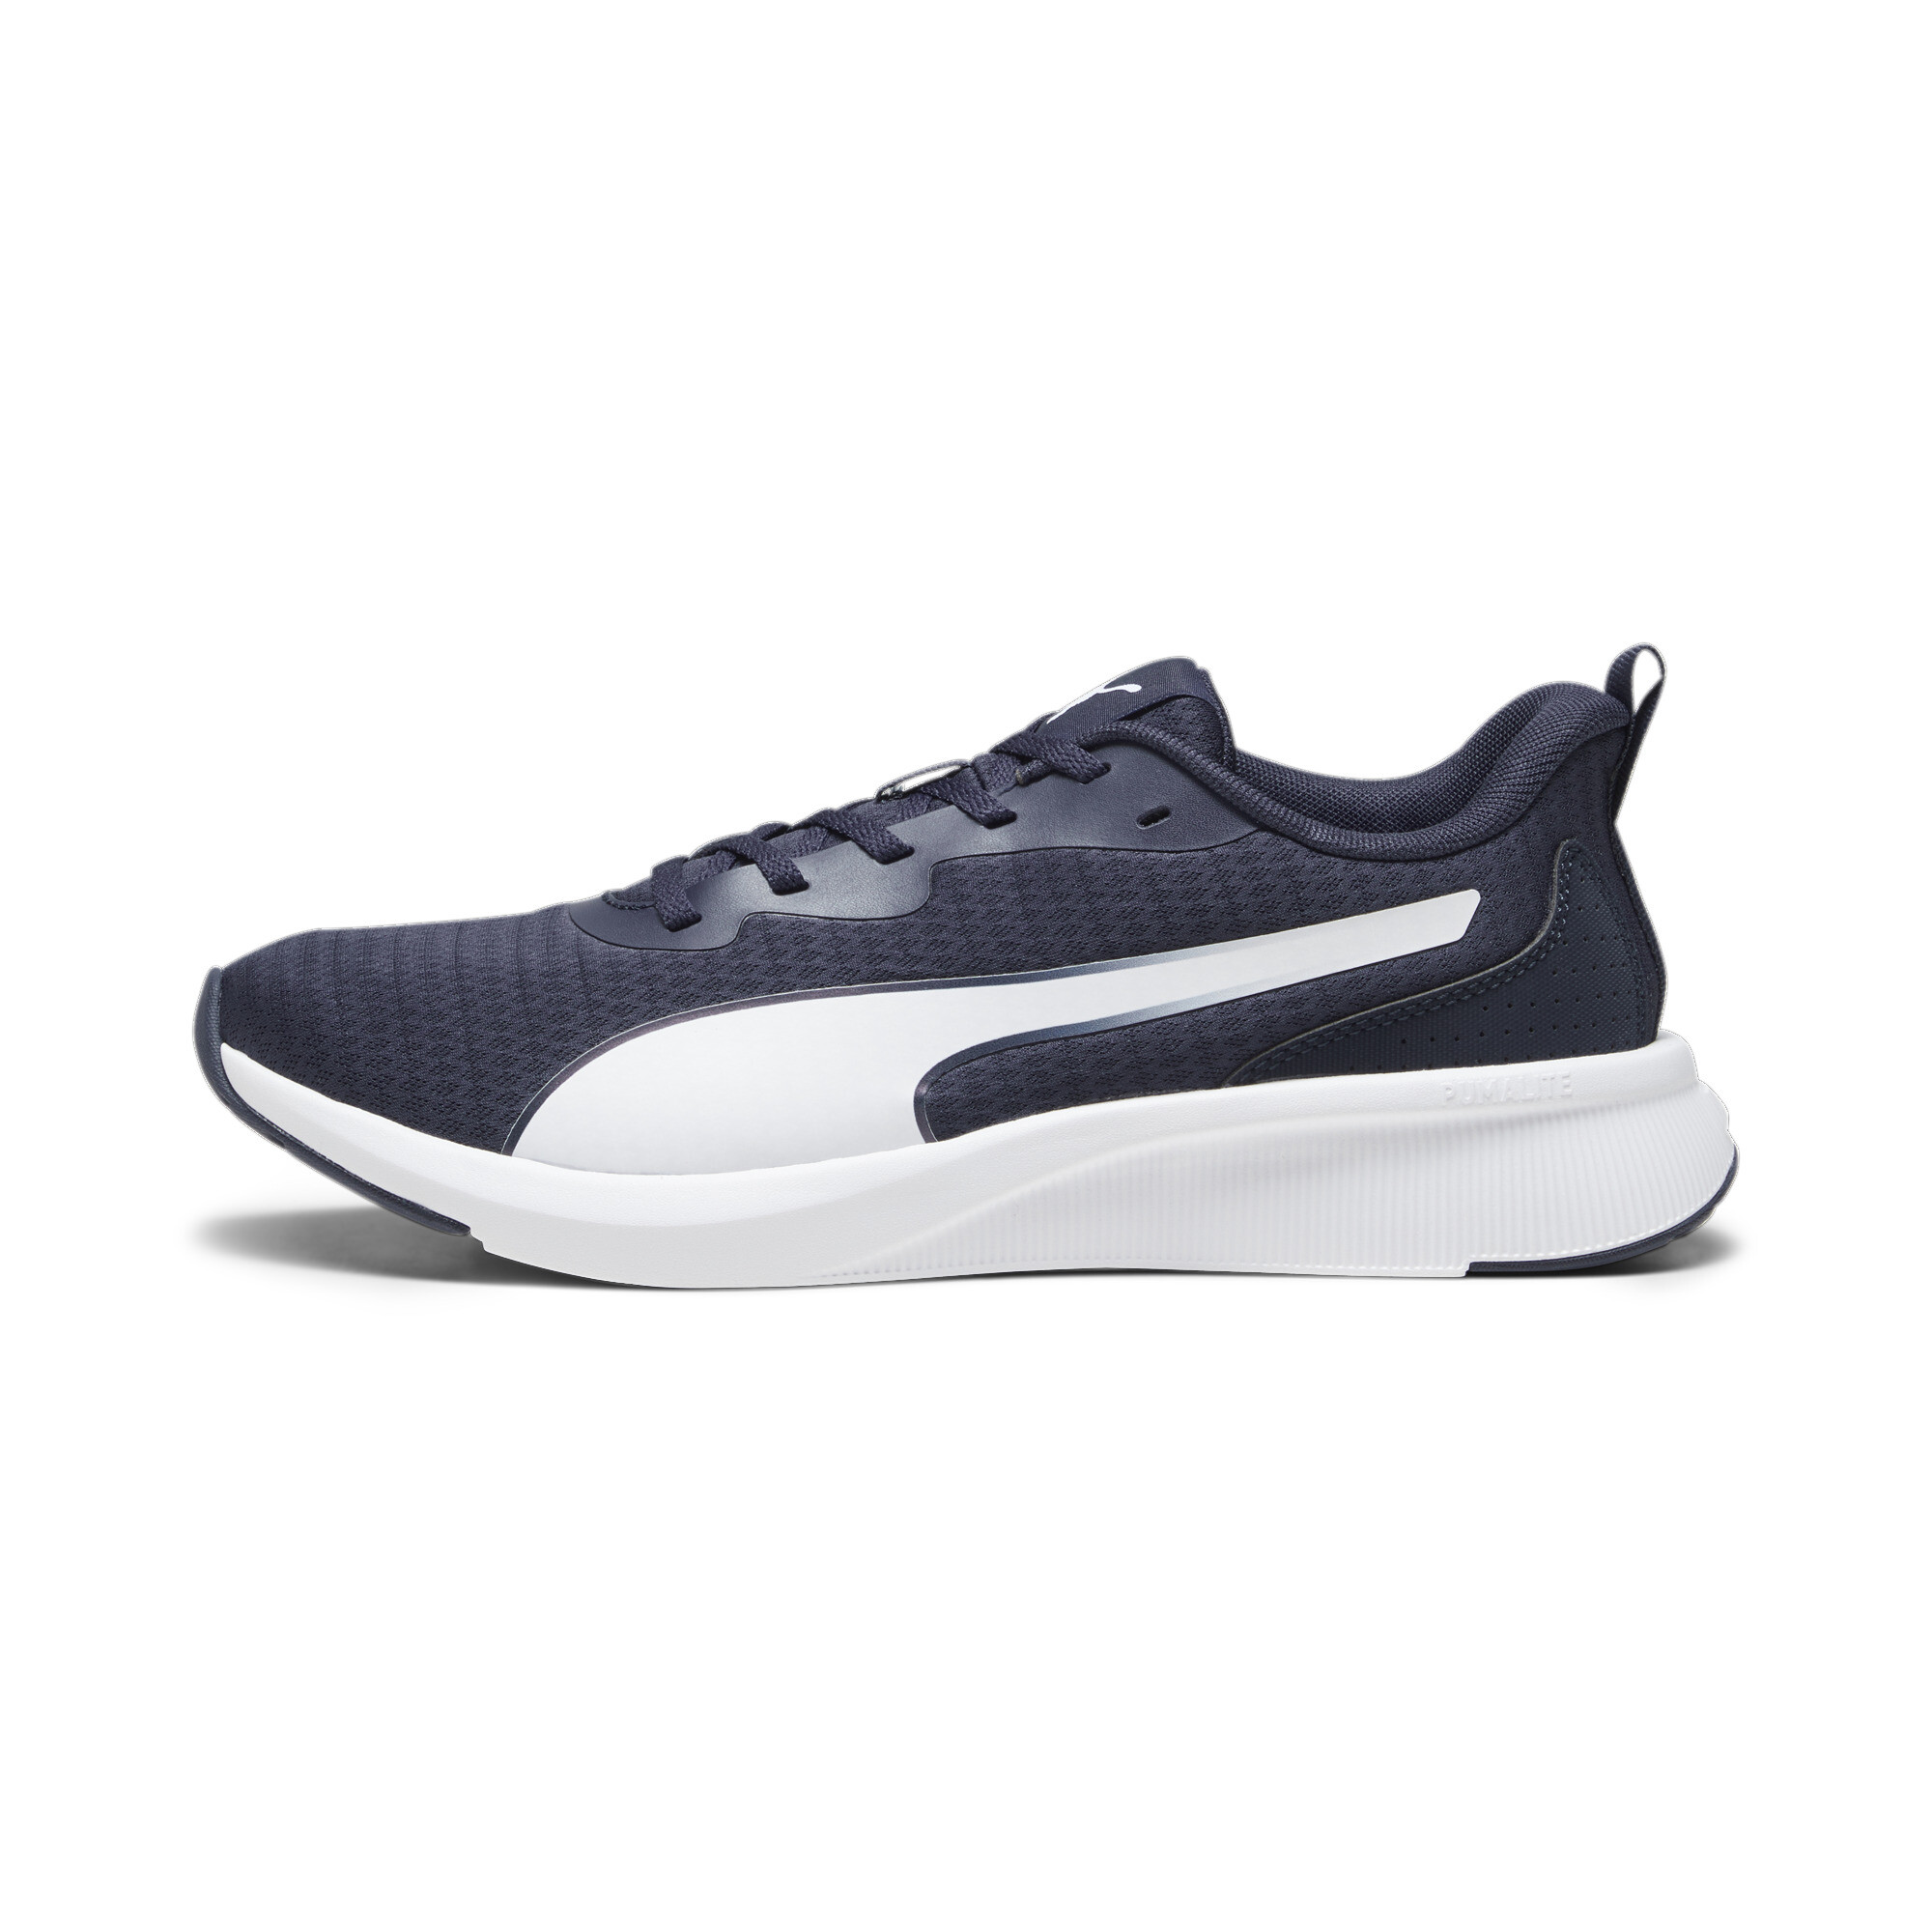 Puma Flyer Lite Running Shoes, Blue, Size 44.5, Shoes